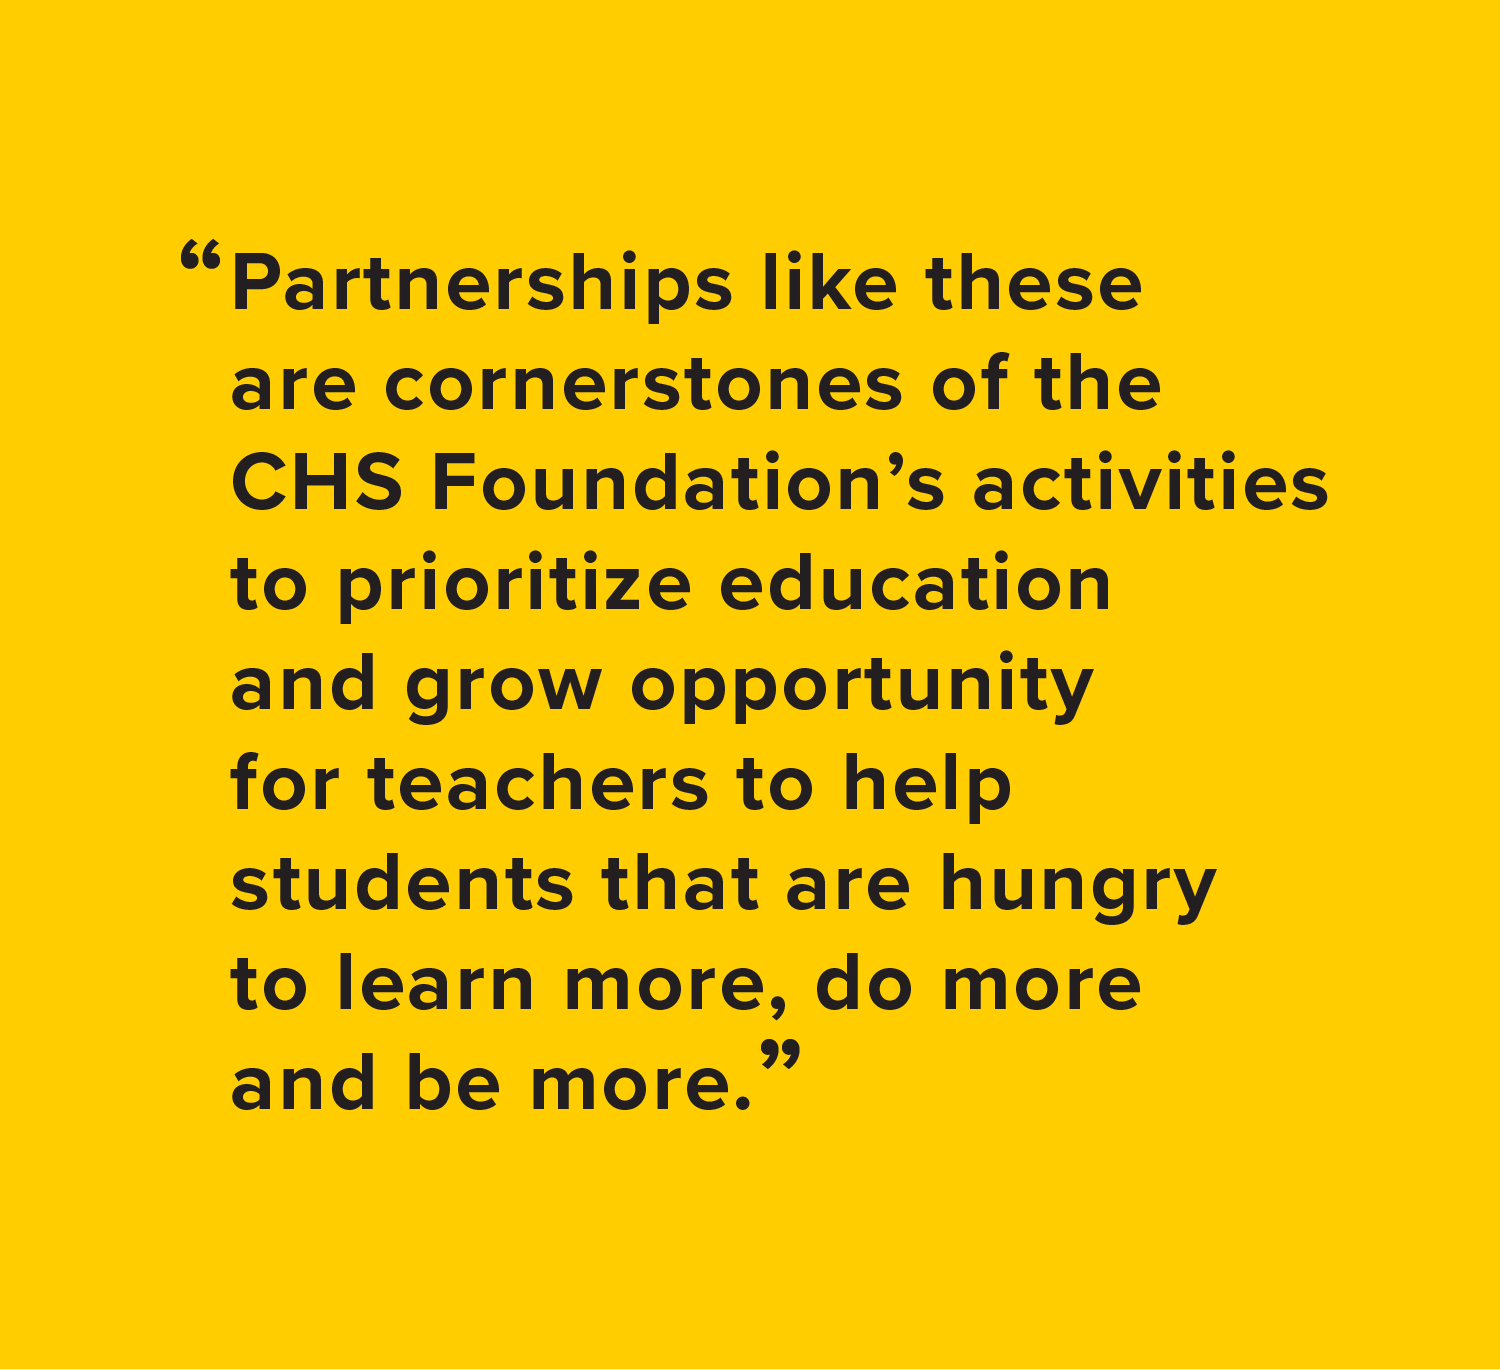 Partnerships like these are cornerstones of the CHS Foundation’s activities to prioritize education and grow opportunity for teachers to help students that are hungry to learn more, do more and be more.